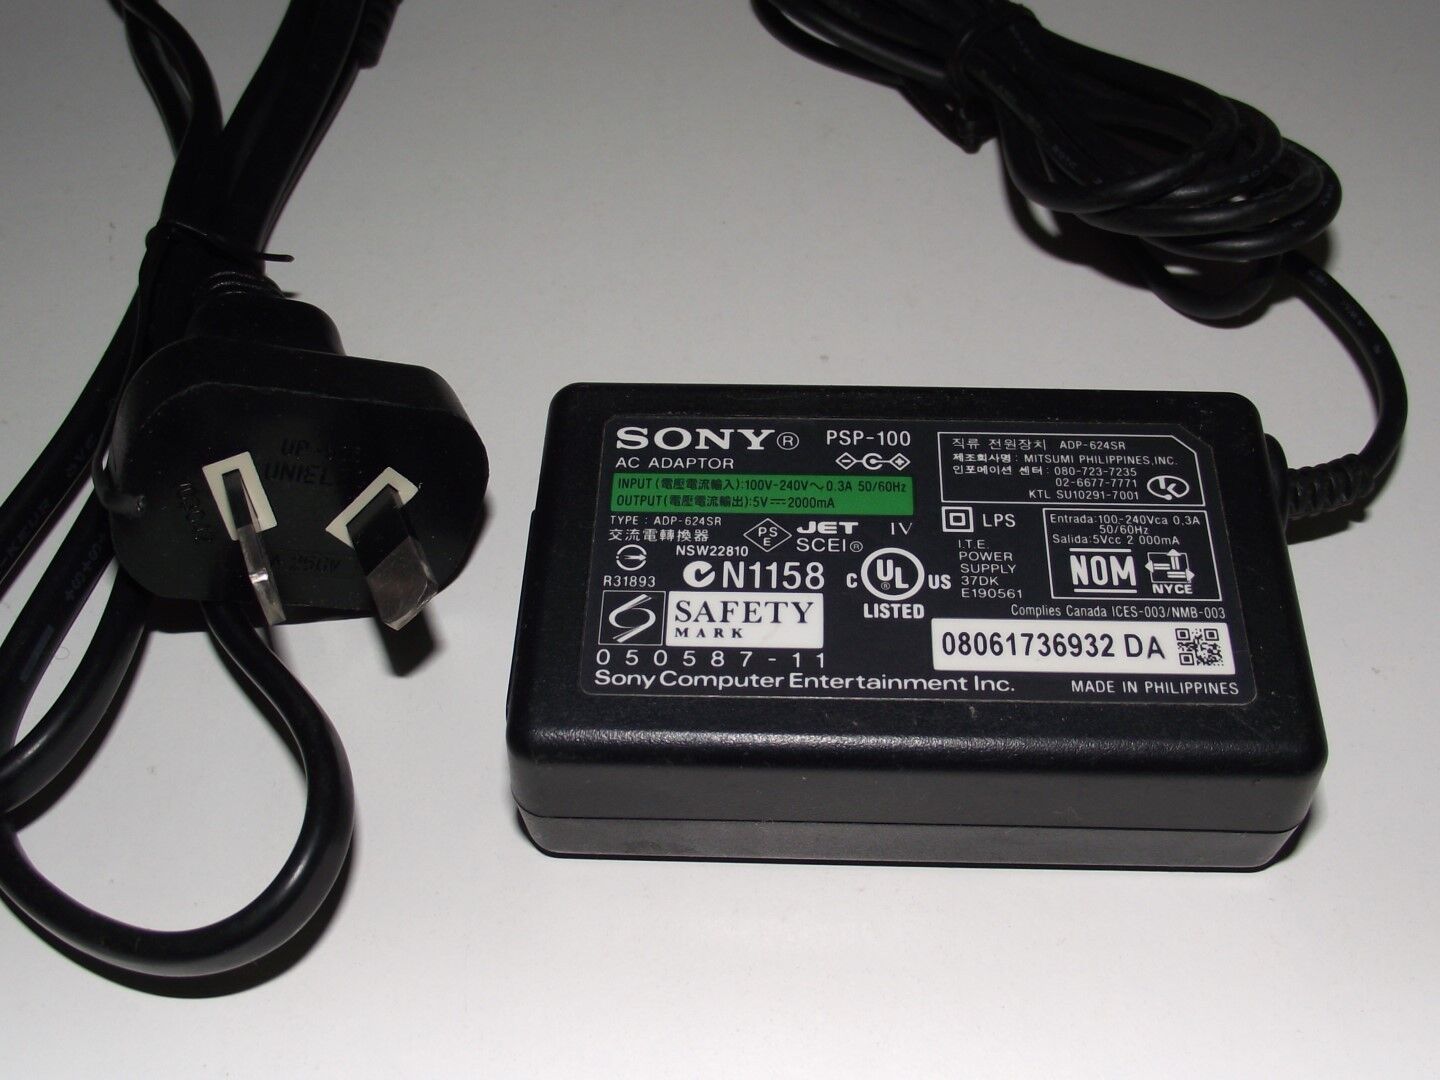 Genuine Playstation PSP 1000 Power Adapter Cord Portable Wall Charger 2000mA Model: PSP-1000 Colour: Black Country/R